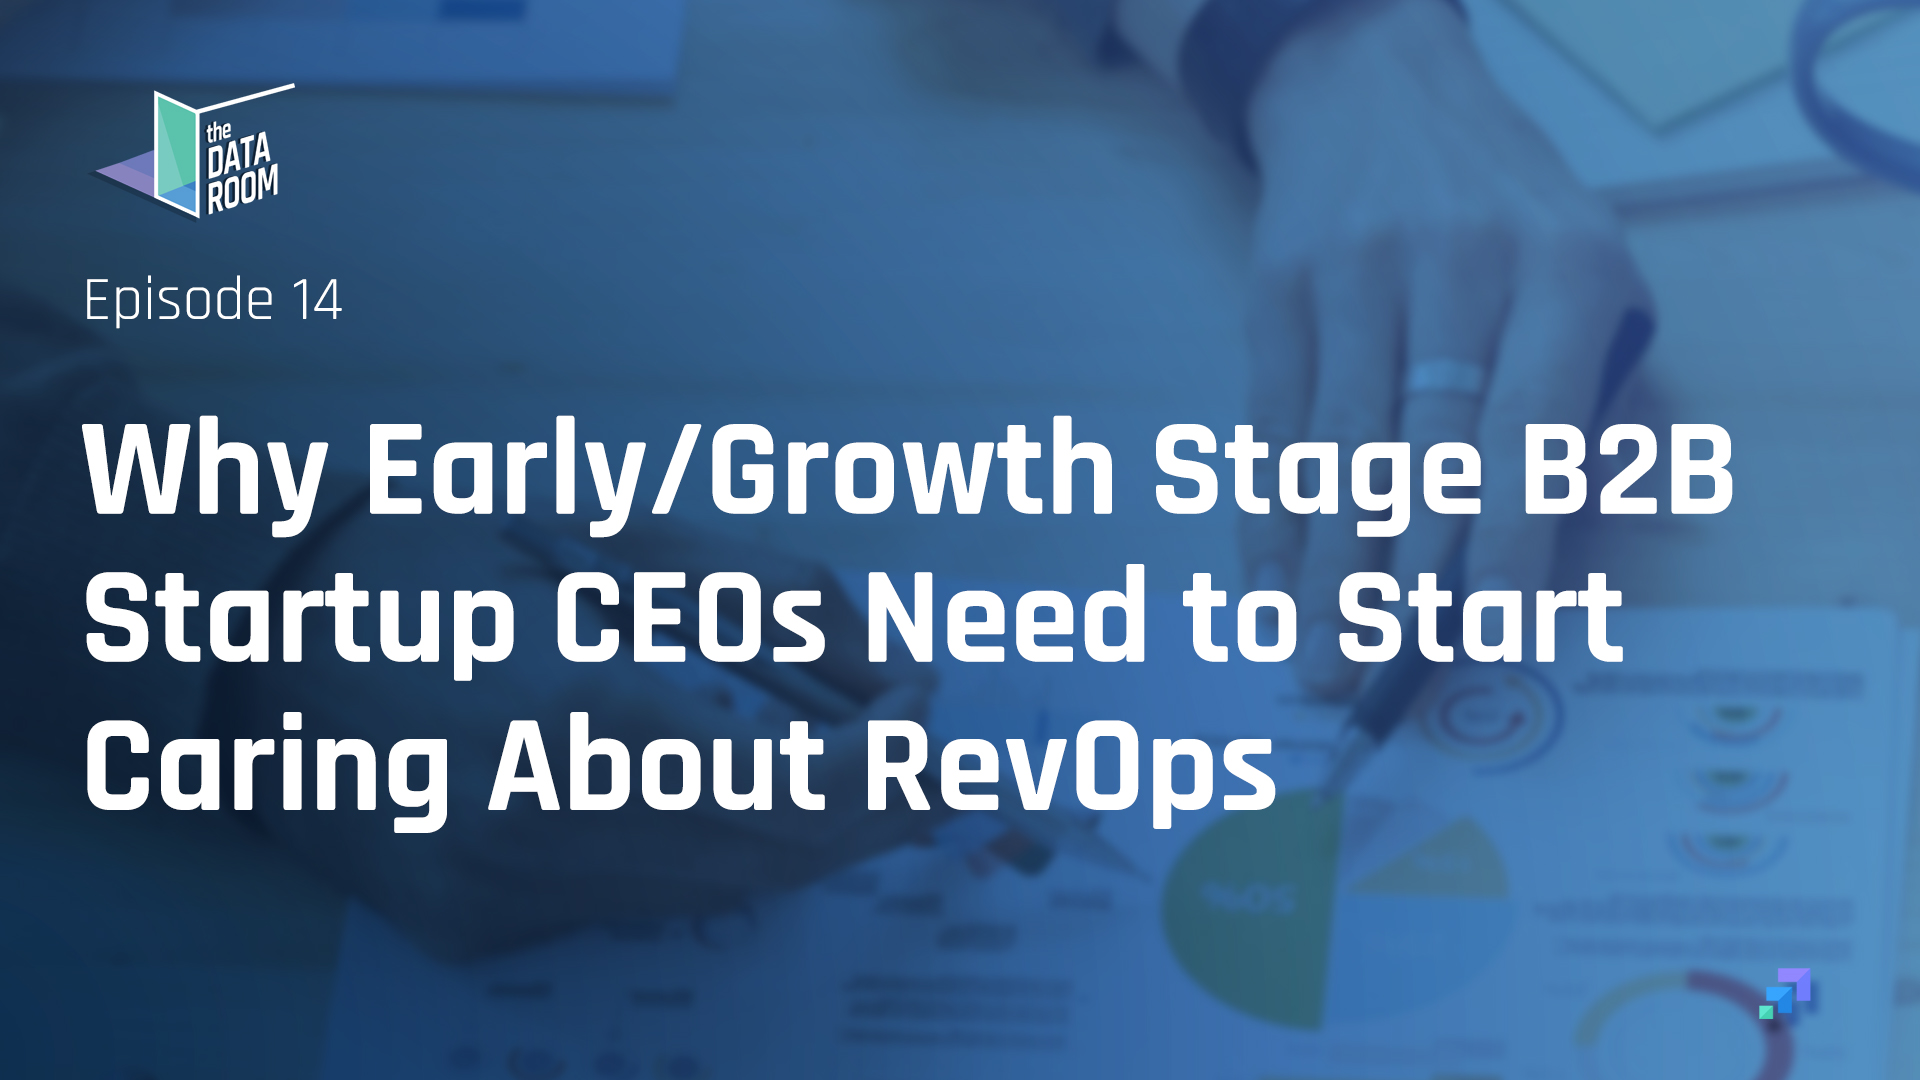 Why Early/Growth Stage B2B Startup CEOs Need to Start Caring About RevOps